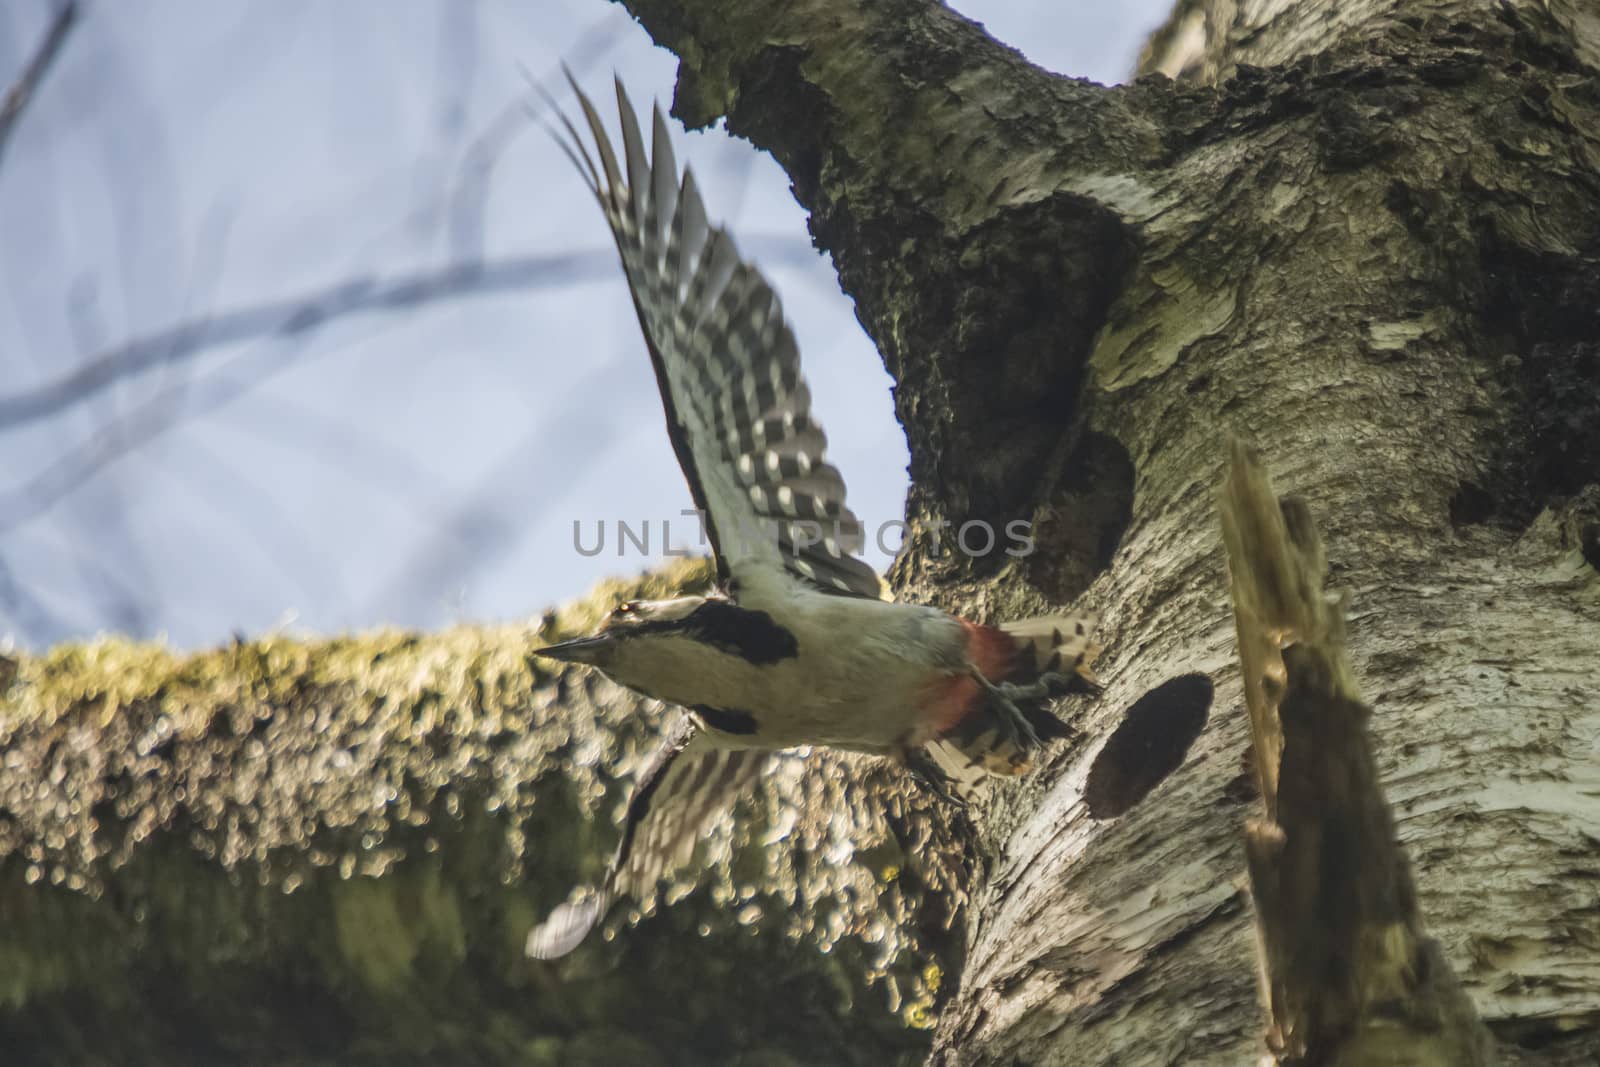 Great Spotted Woodpecker, Dendrocopos major flying out of the nest. The image is shot at Roeds mountain in Halden, Norway